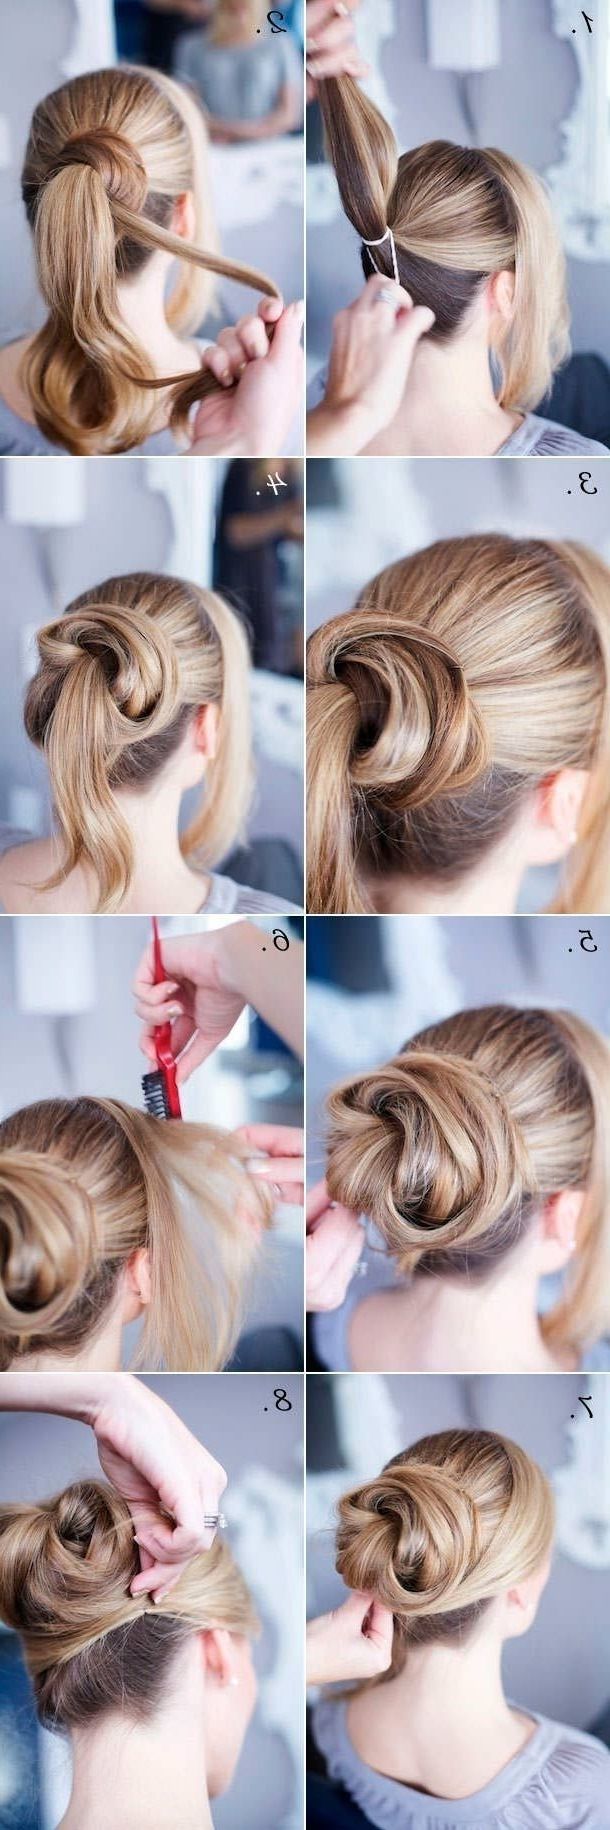 14 Easy Stepstep Updo Hairstyles Tutorials – Pretty Designs Inside Updo Hairstyles For Long Hair Tutorial (View 1 of 15)